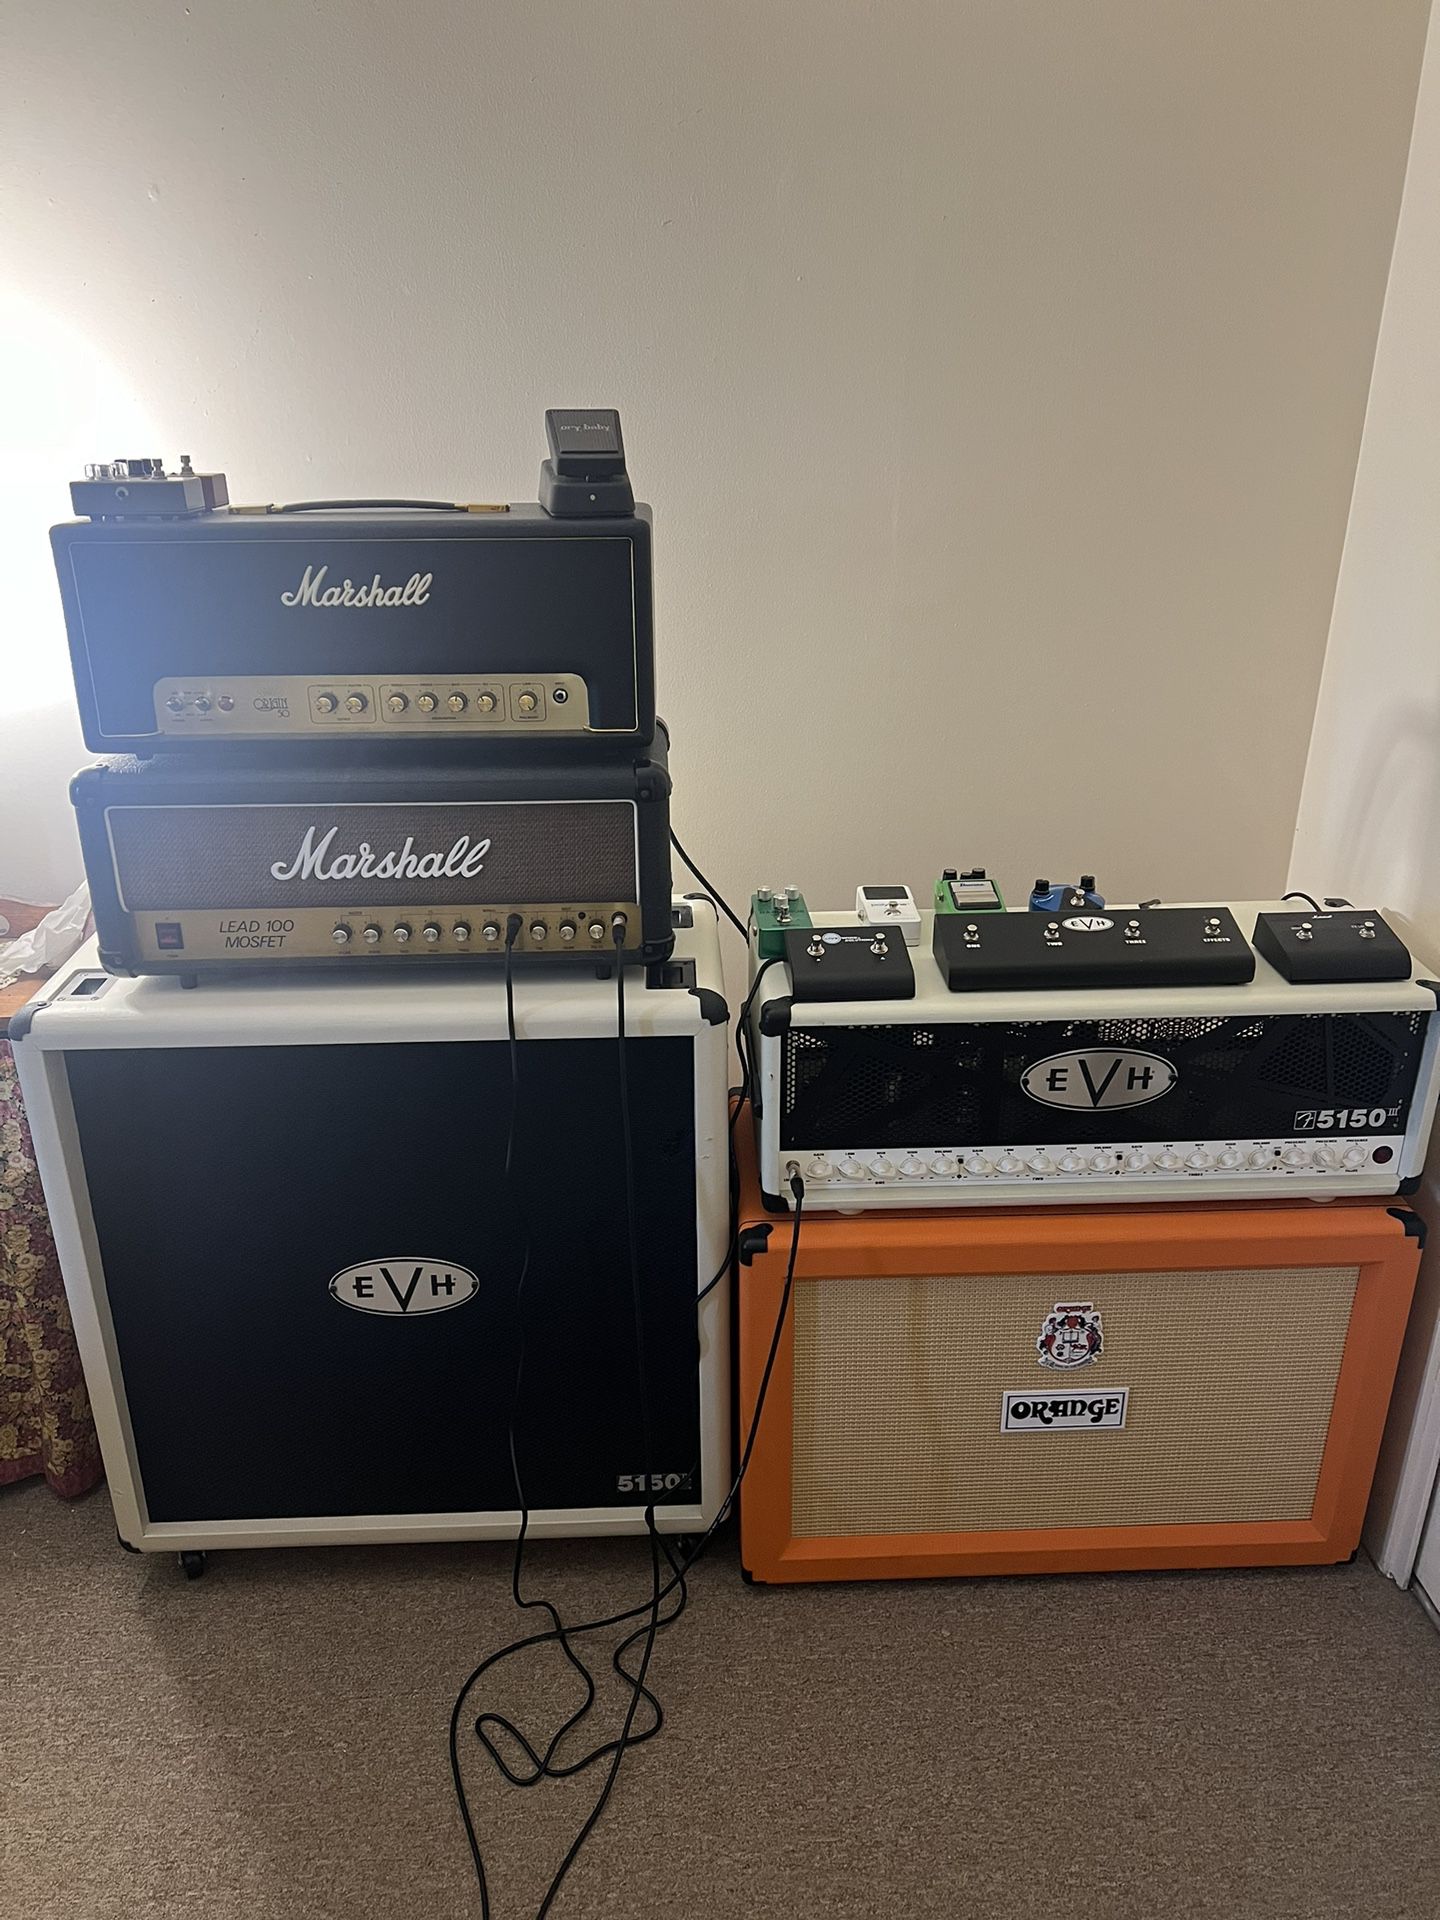 EVH 5150 100W Amp And 4X12 EVH Cabinet, Marshall 100W and 50W Amps, Orange 2x12 Cabinet